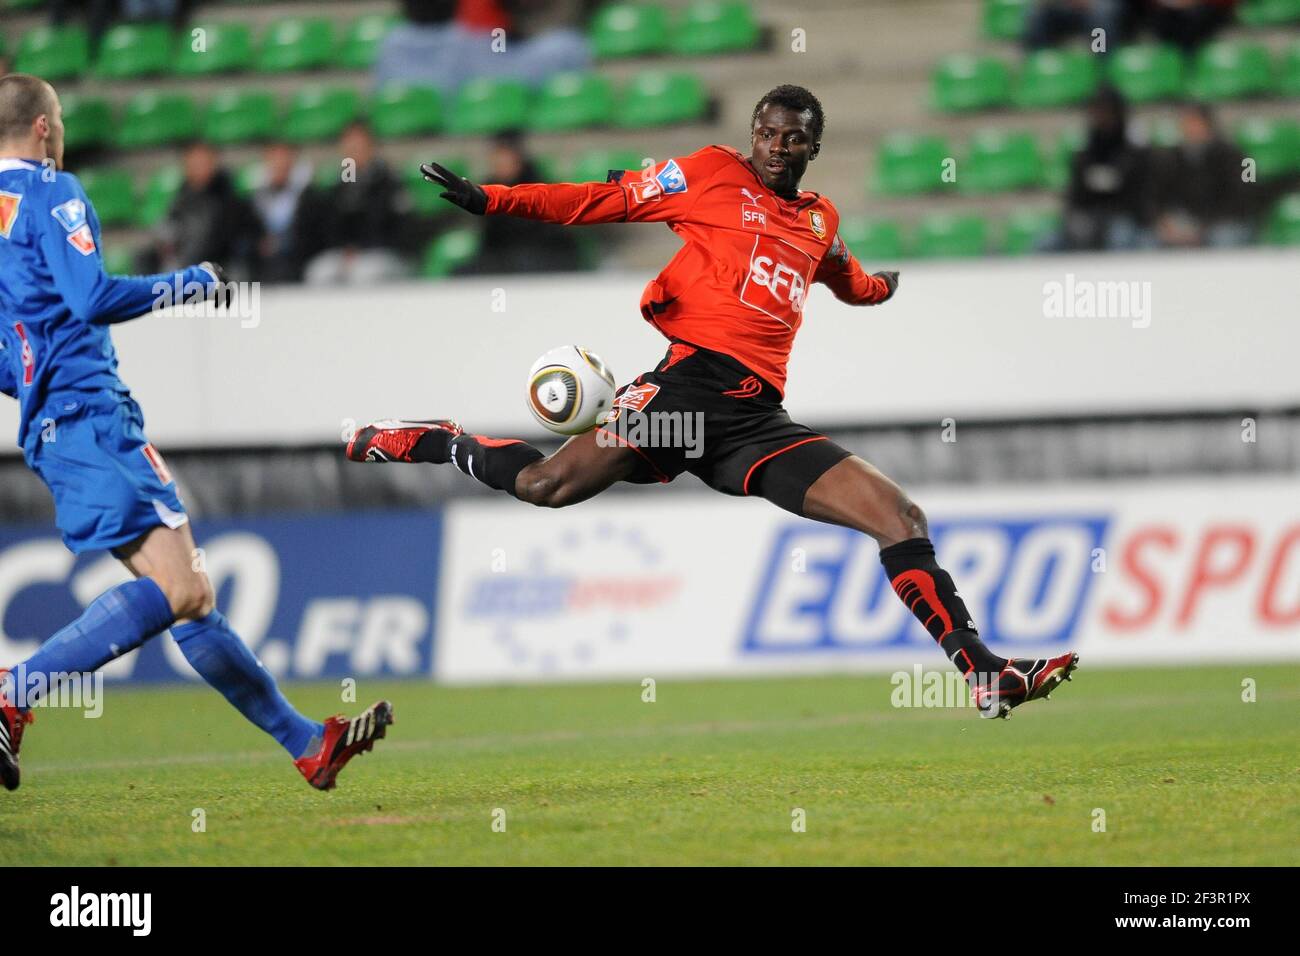 FOOTBALL - FOOT - FRENCH CUP - 2009/2010 - 100109 - RENNES v CAEN - PHOTO PASCAL ALLEE / DPPI - ISMAEL BANGOURA (RENNES) / Stock Photo